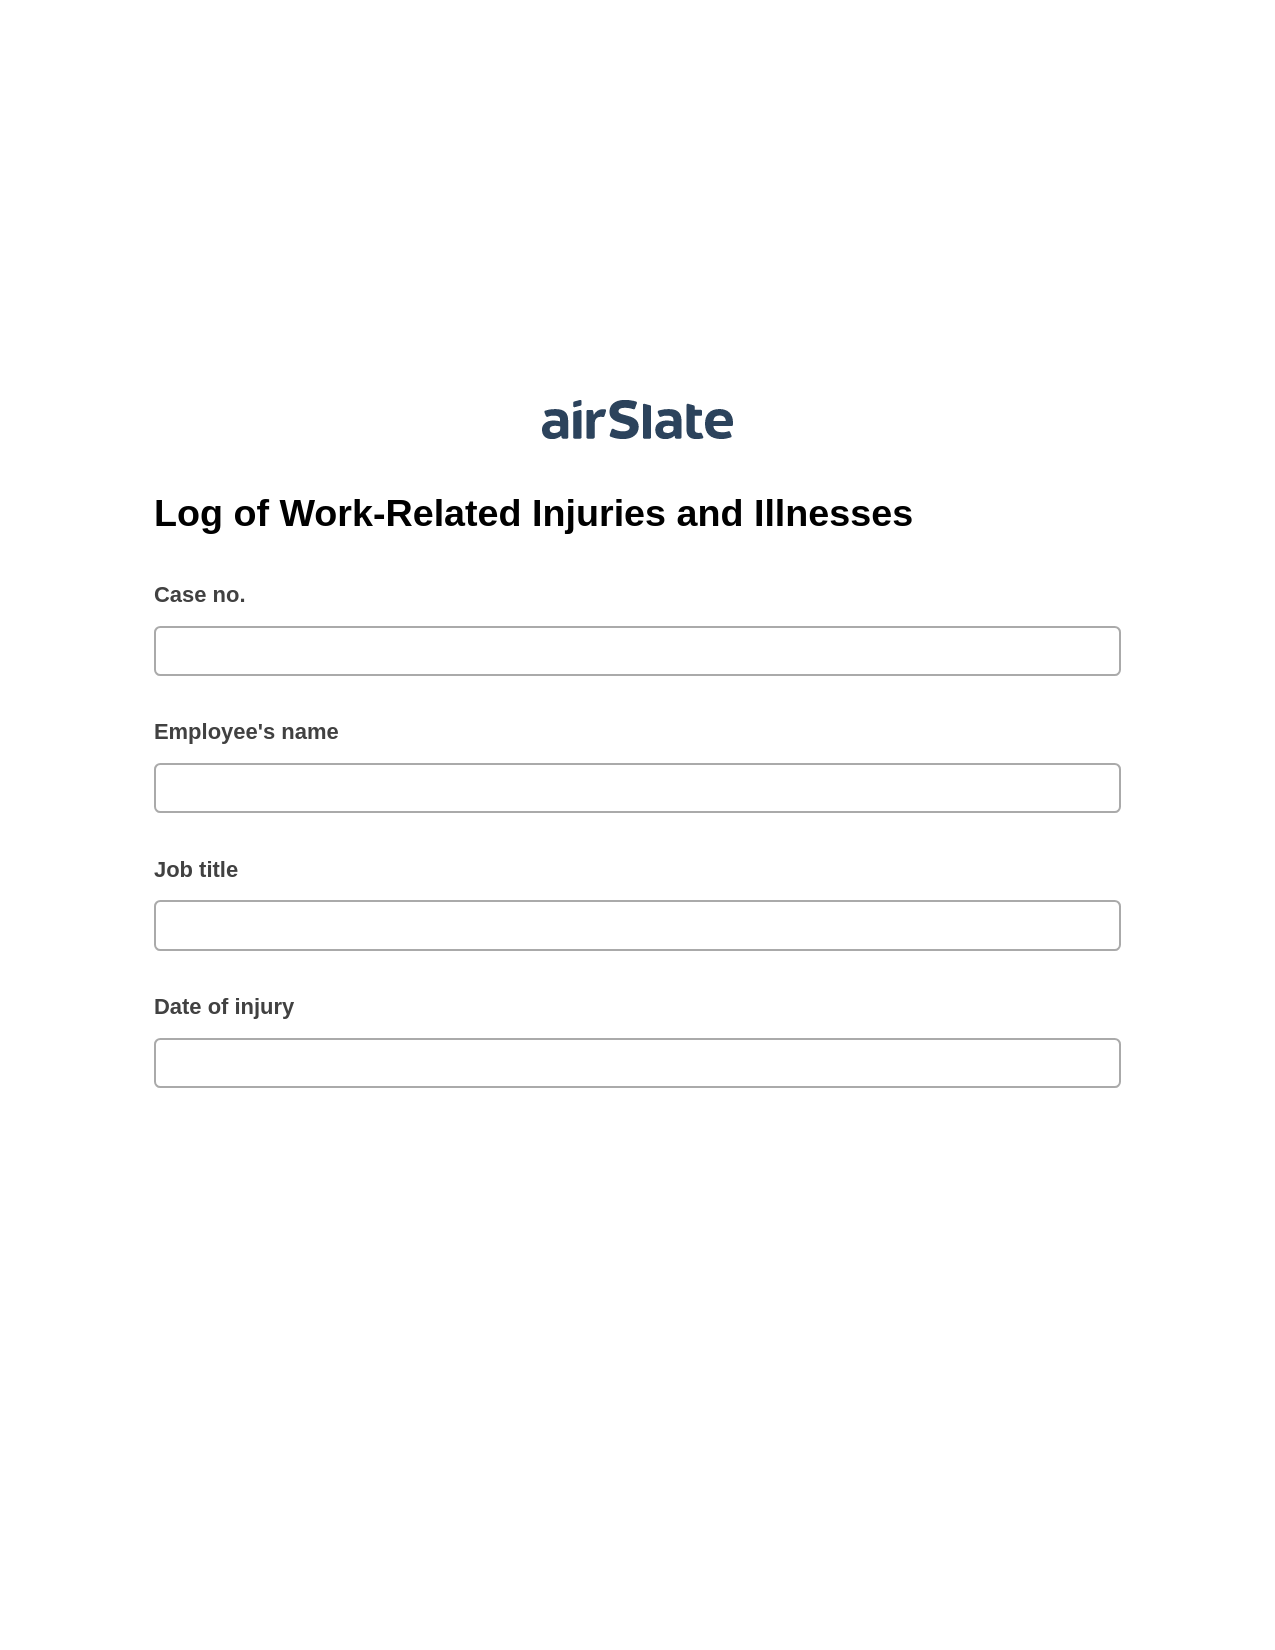 Multirole Log of Work-Related Injuries and Illnesses Pre-fill from Salesforce Record Bot, Email Notification Bot, Slack Notification Postfinish Bot